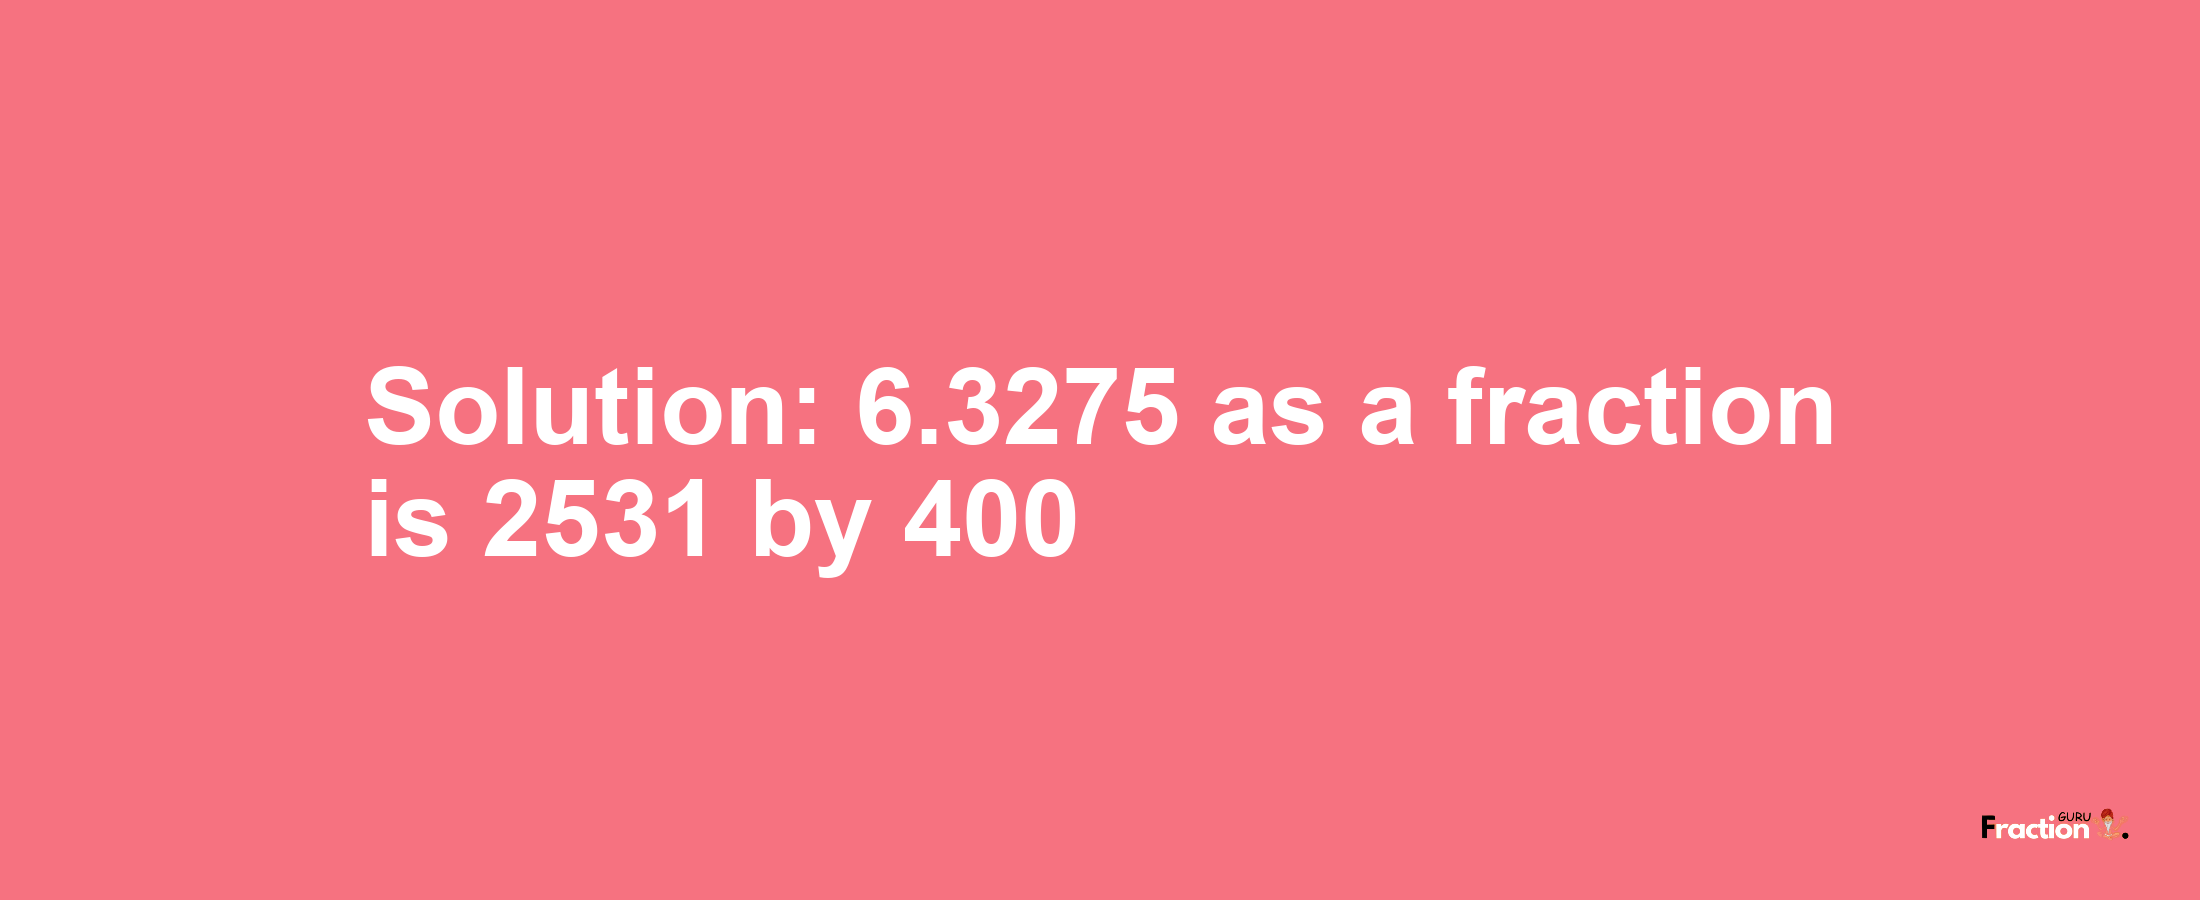 Solution:6.3275 as a fraction is 2531/400